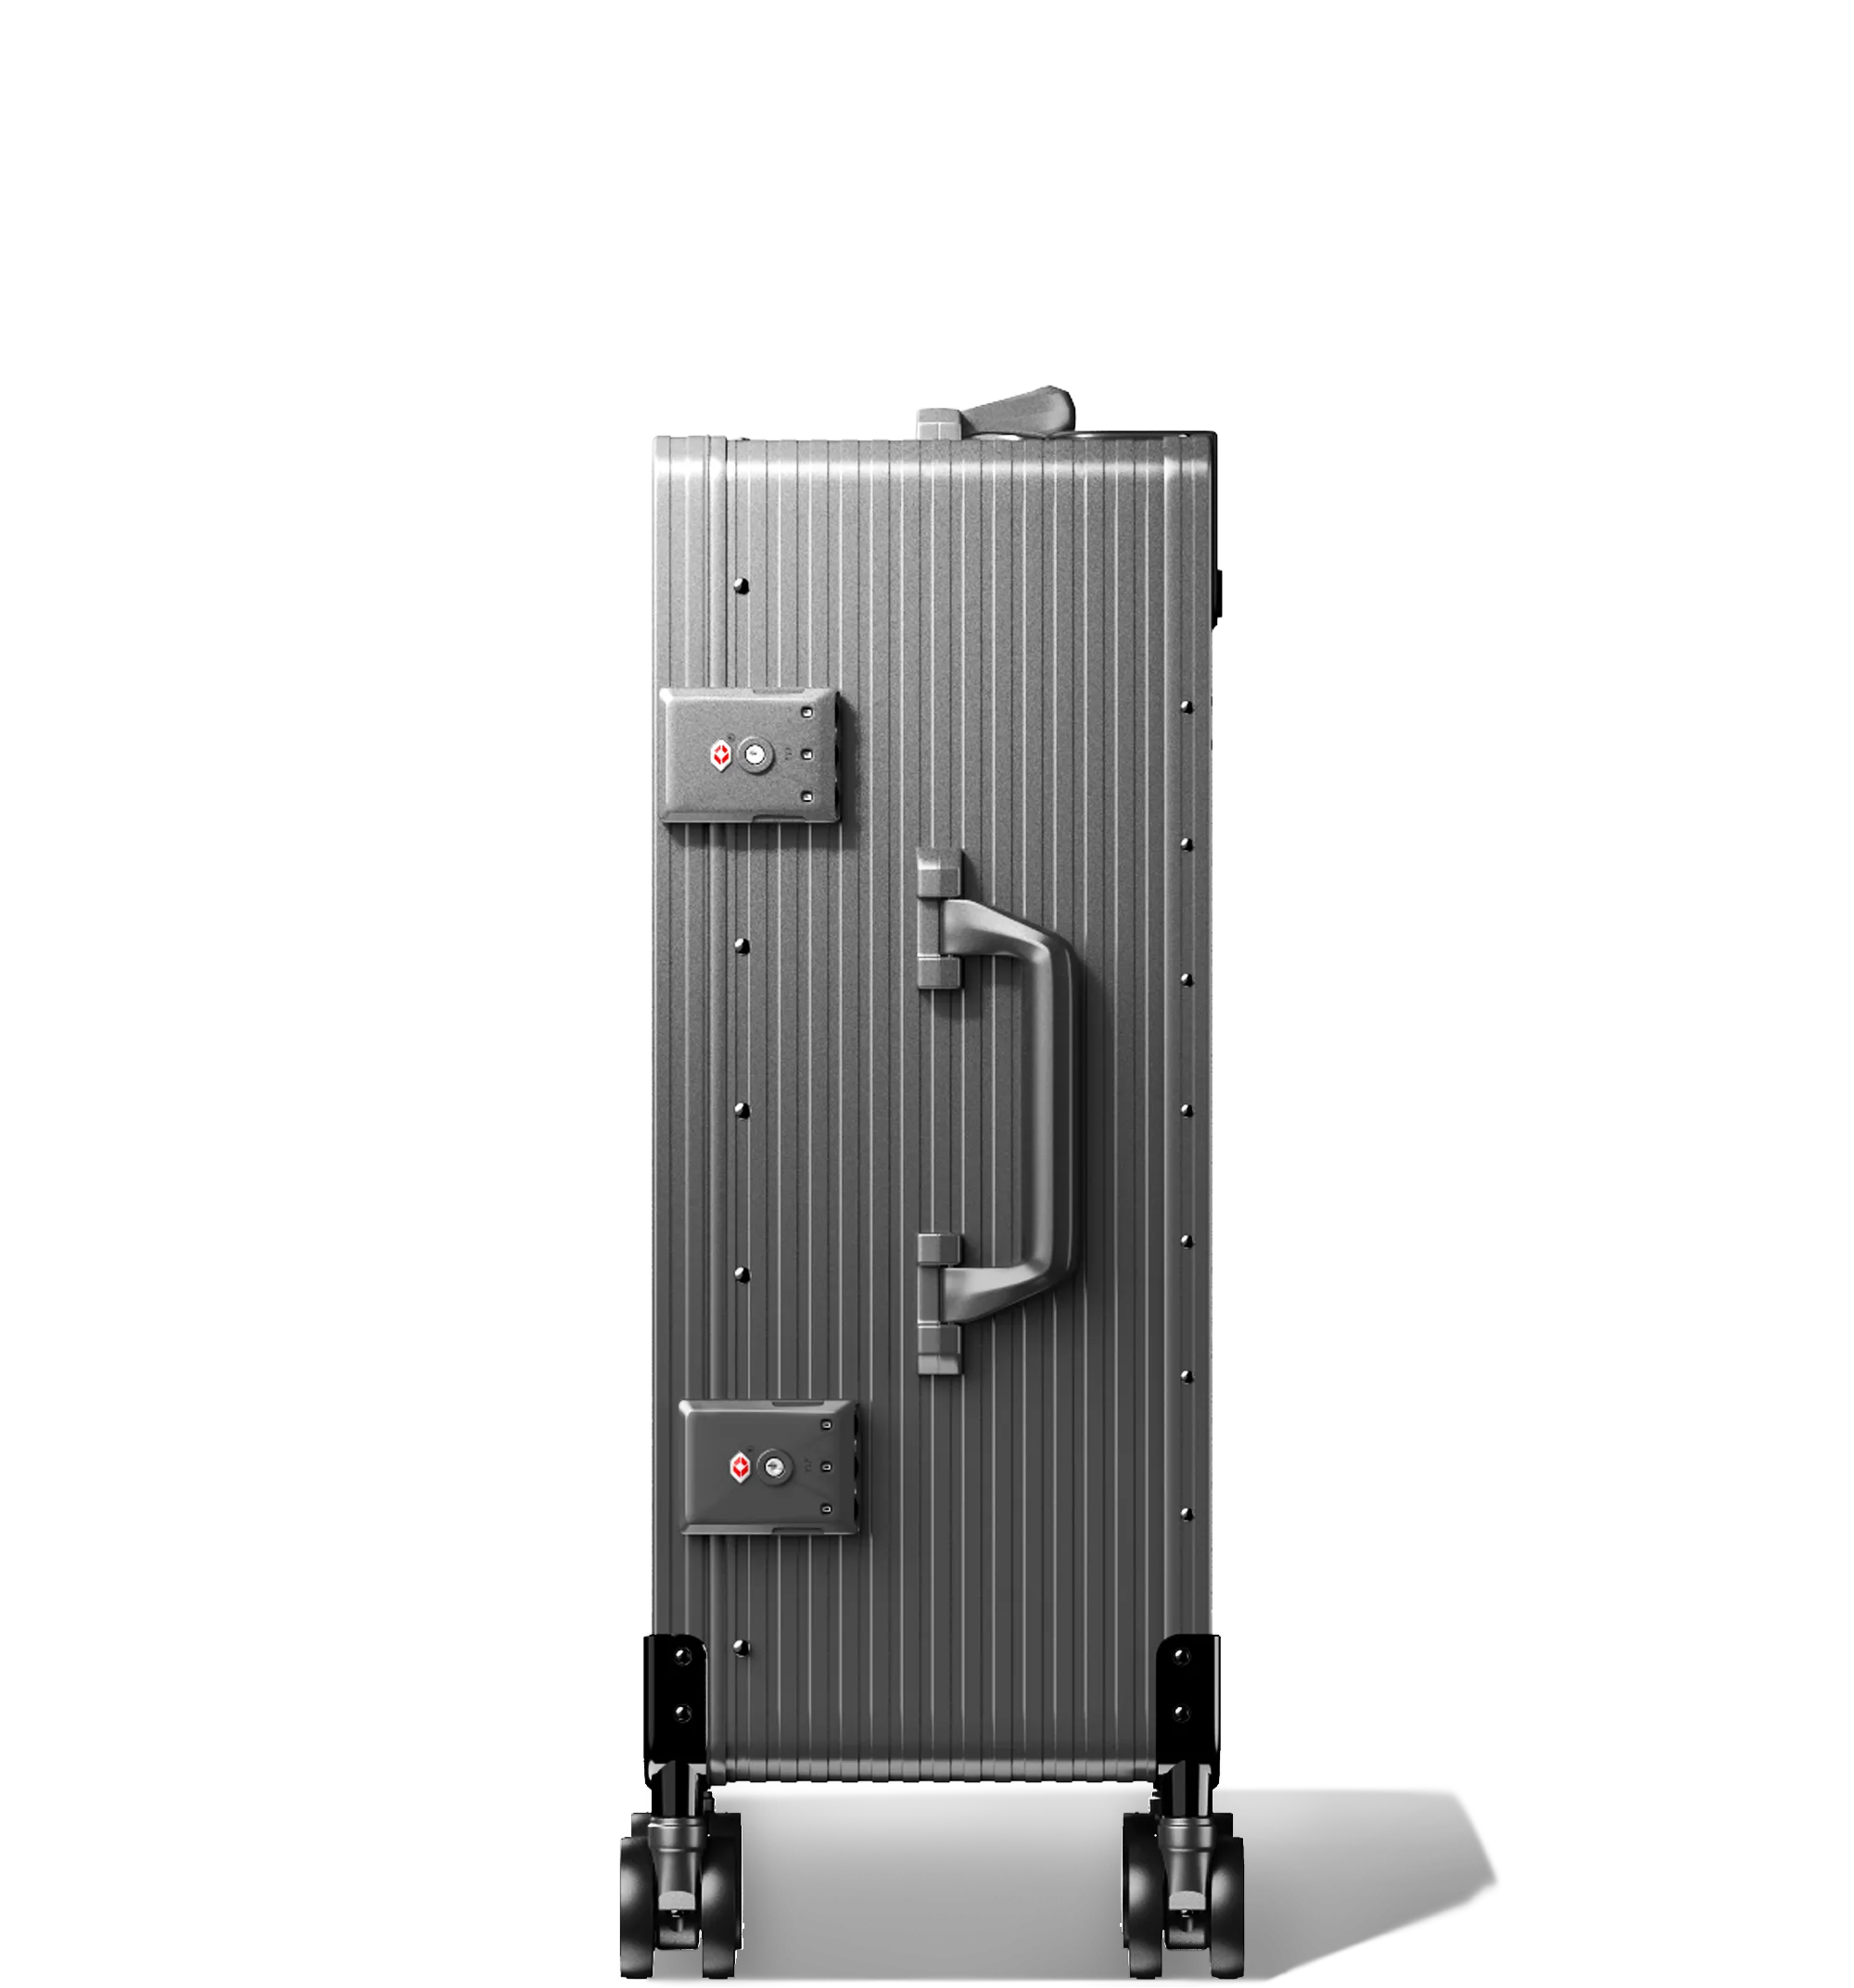 A Gun Metal Cabin In 56/20 hard-shell aluminium Luggage standing upright with ribbed texture, side and top carry handles, two TSA-approved combination locks, and four spinning wheels, against a white background.